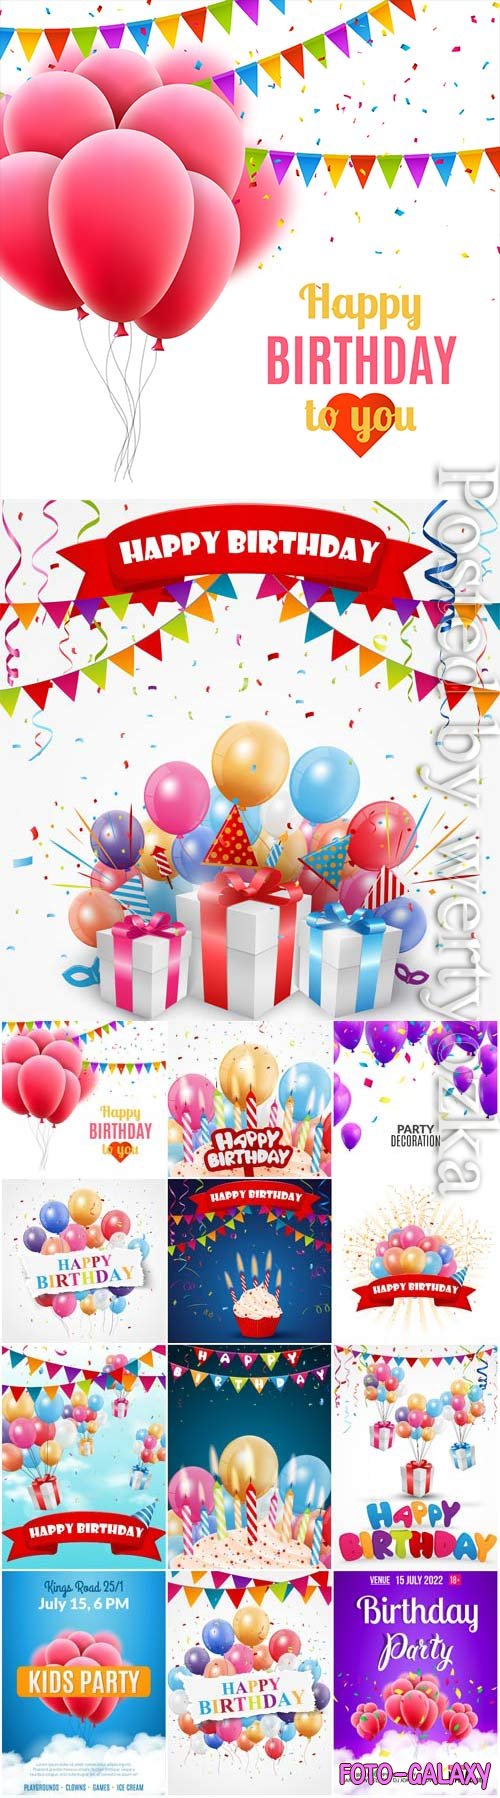 Holiday posters happy birthday in vector